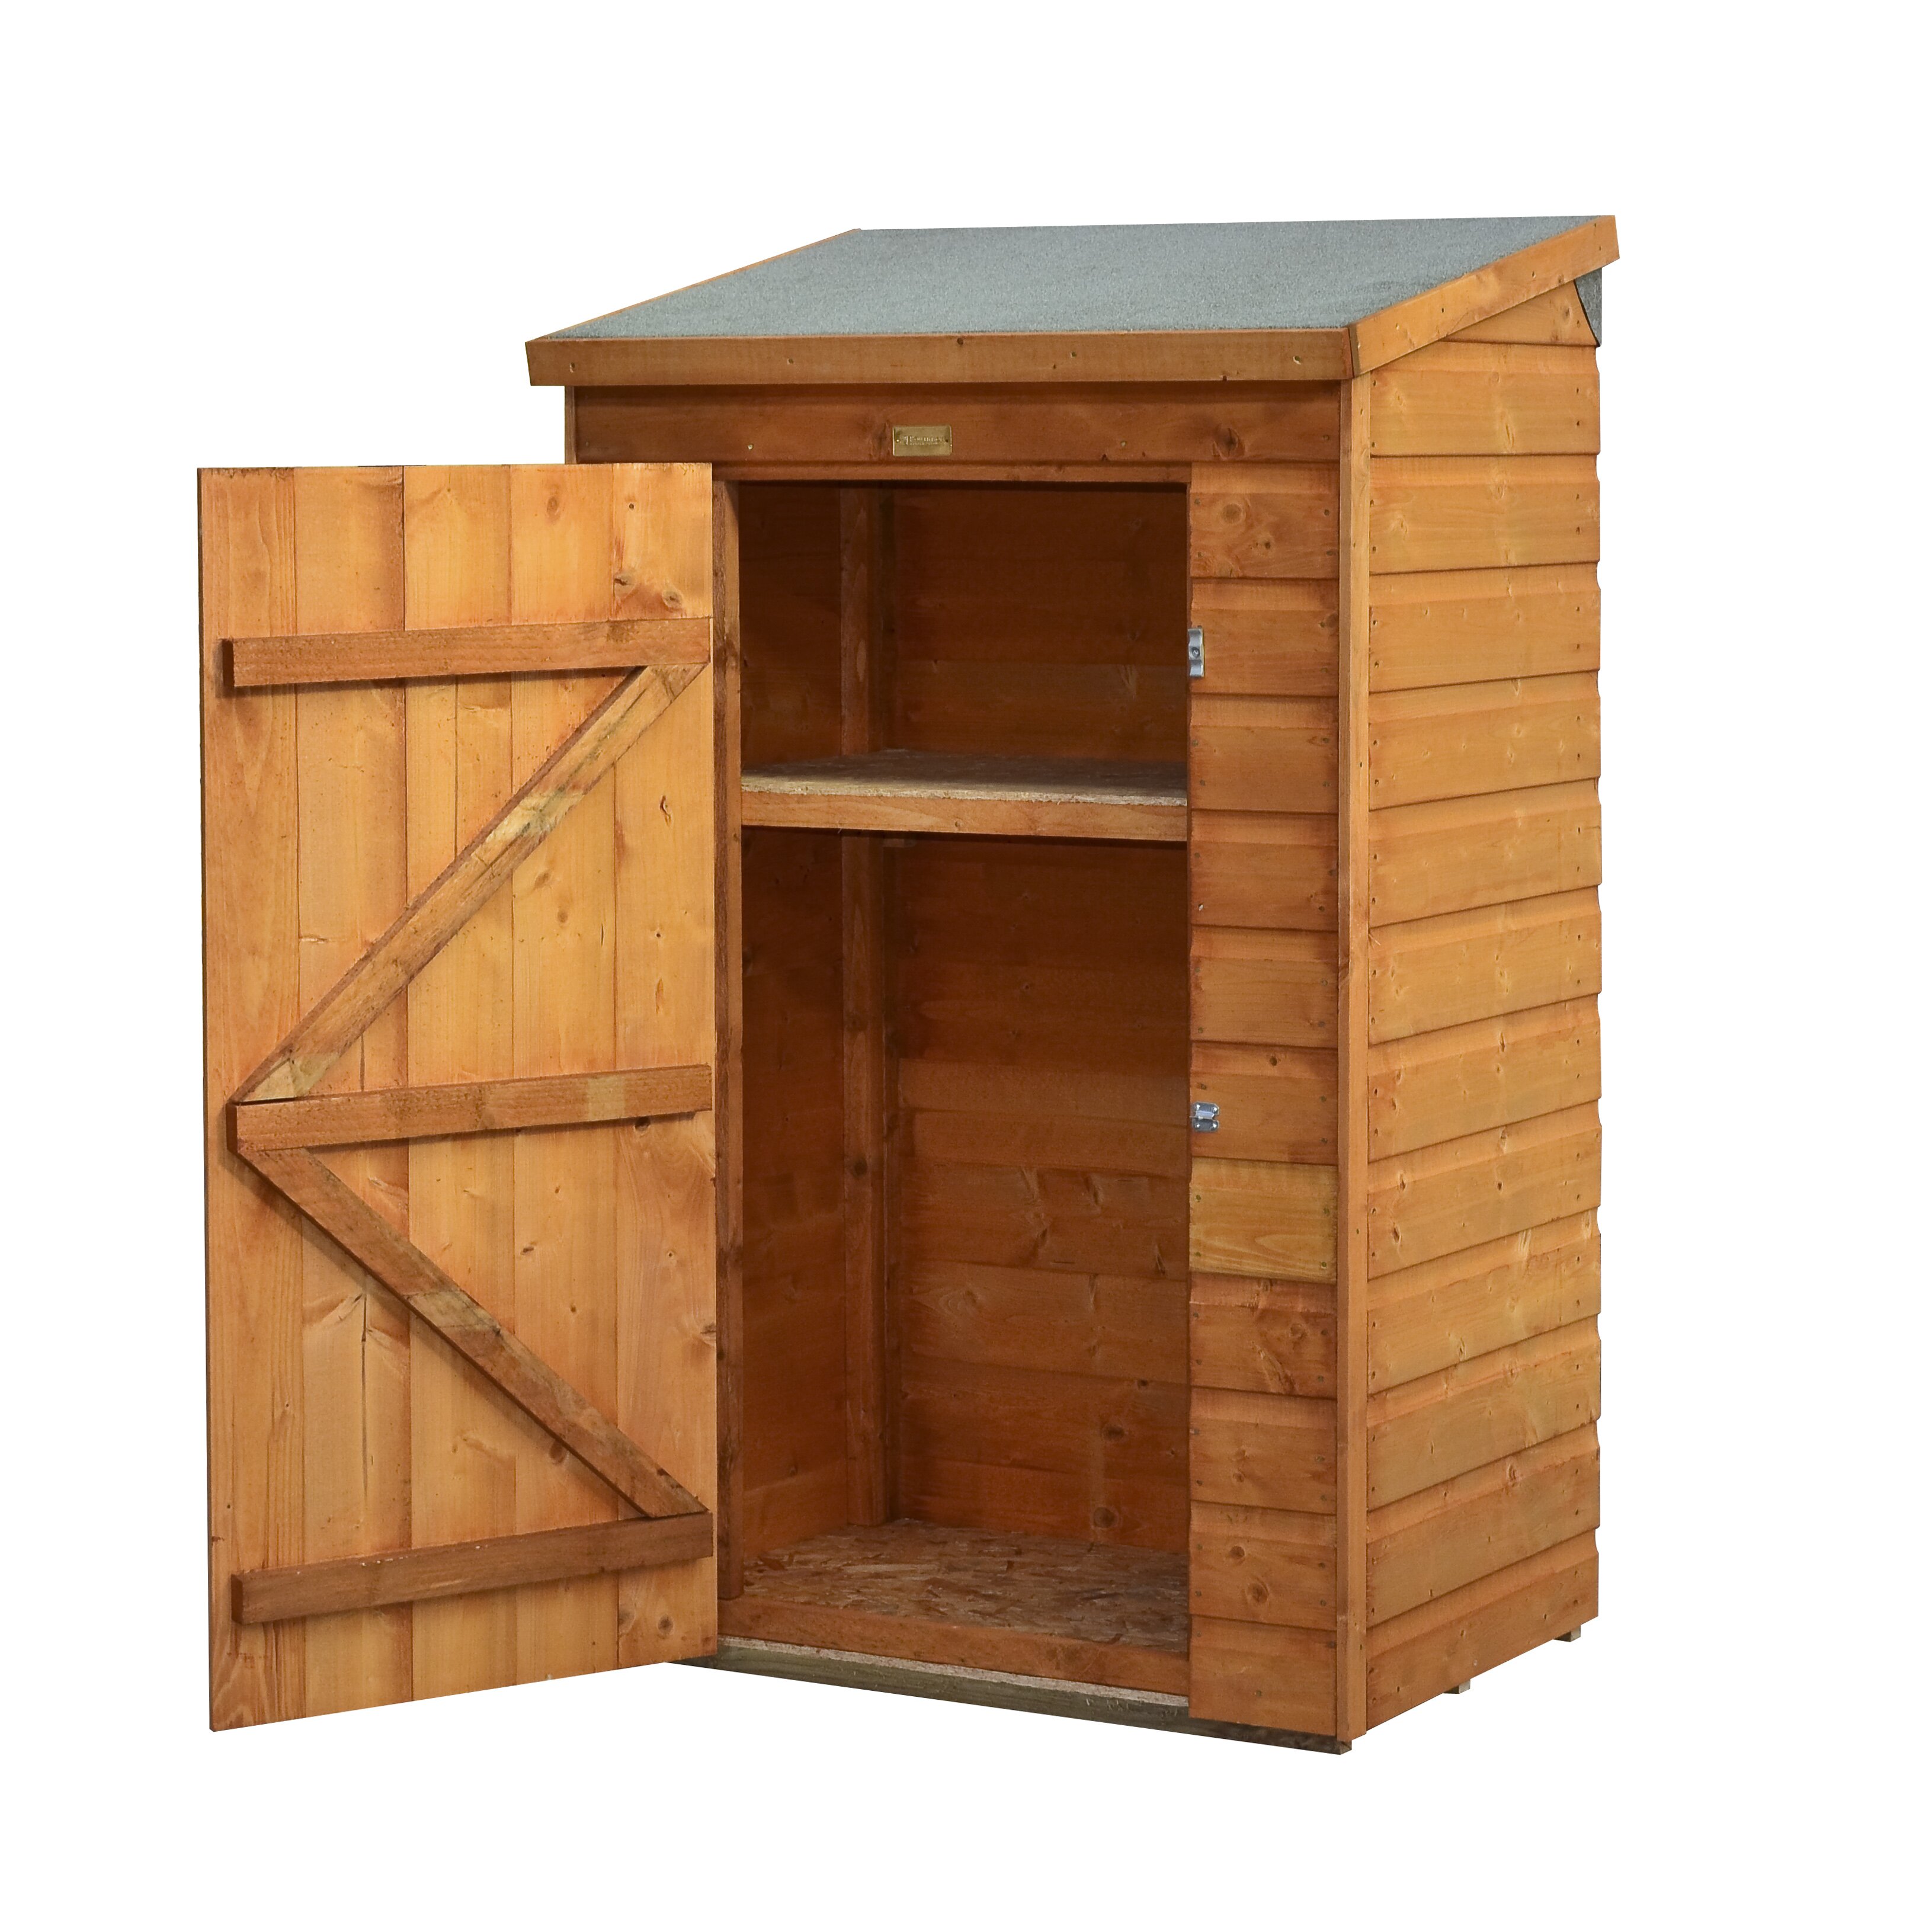 Rowlinson 3 Ft. W x 2 Ft. D Timber Storage Shed & Reviews | Wayfair